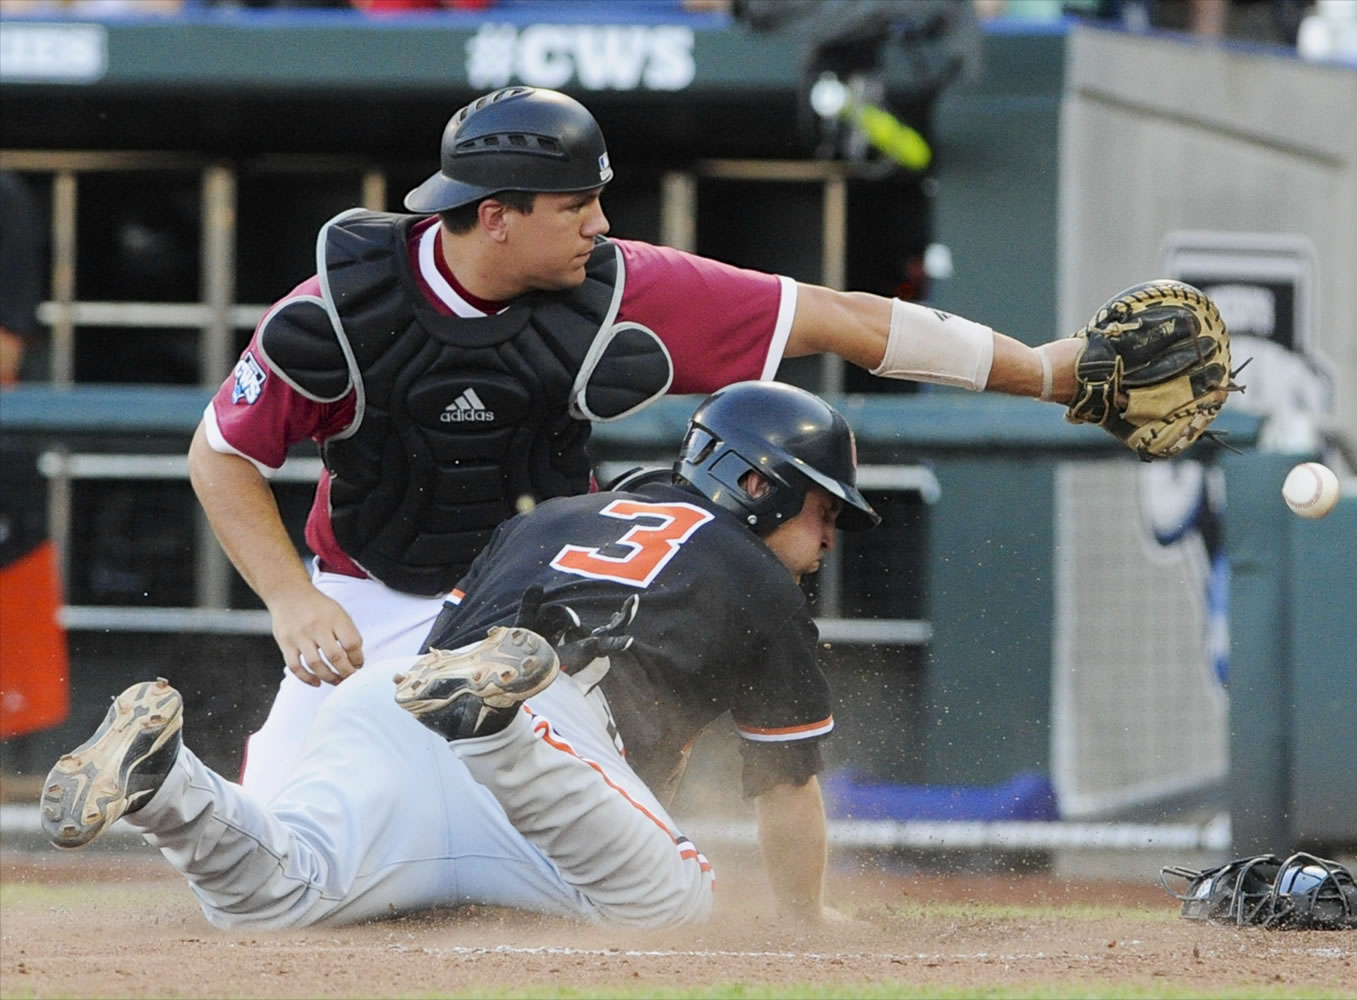 Oregon State's Kavin Keyes (3) scores at home plate as the ball gets away from Indiana catcher Kyle Schwarber on a sacrifice fly by Jake Rodriguez in the fourth inning of an NCAA College World Series elimination baseball game in Omaha, Neb., Wednesday, June 19, 2013.